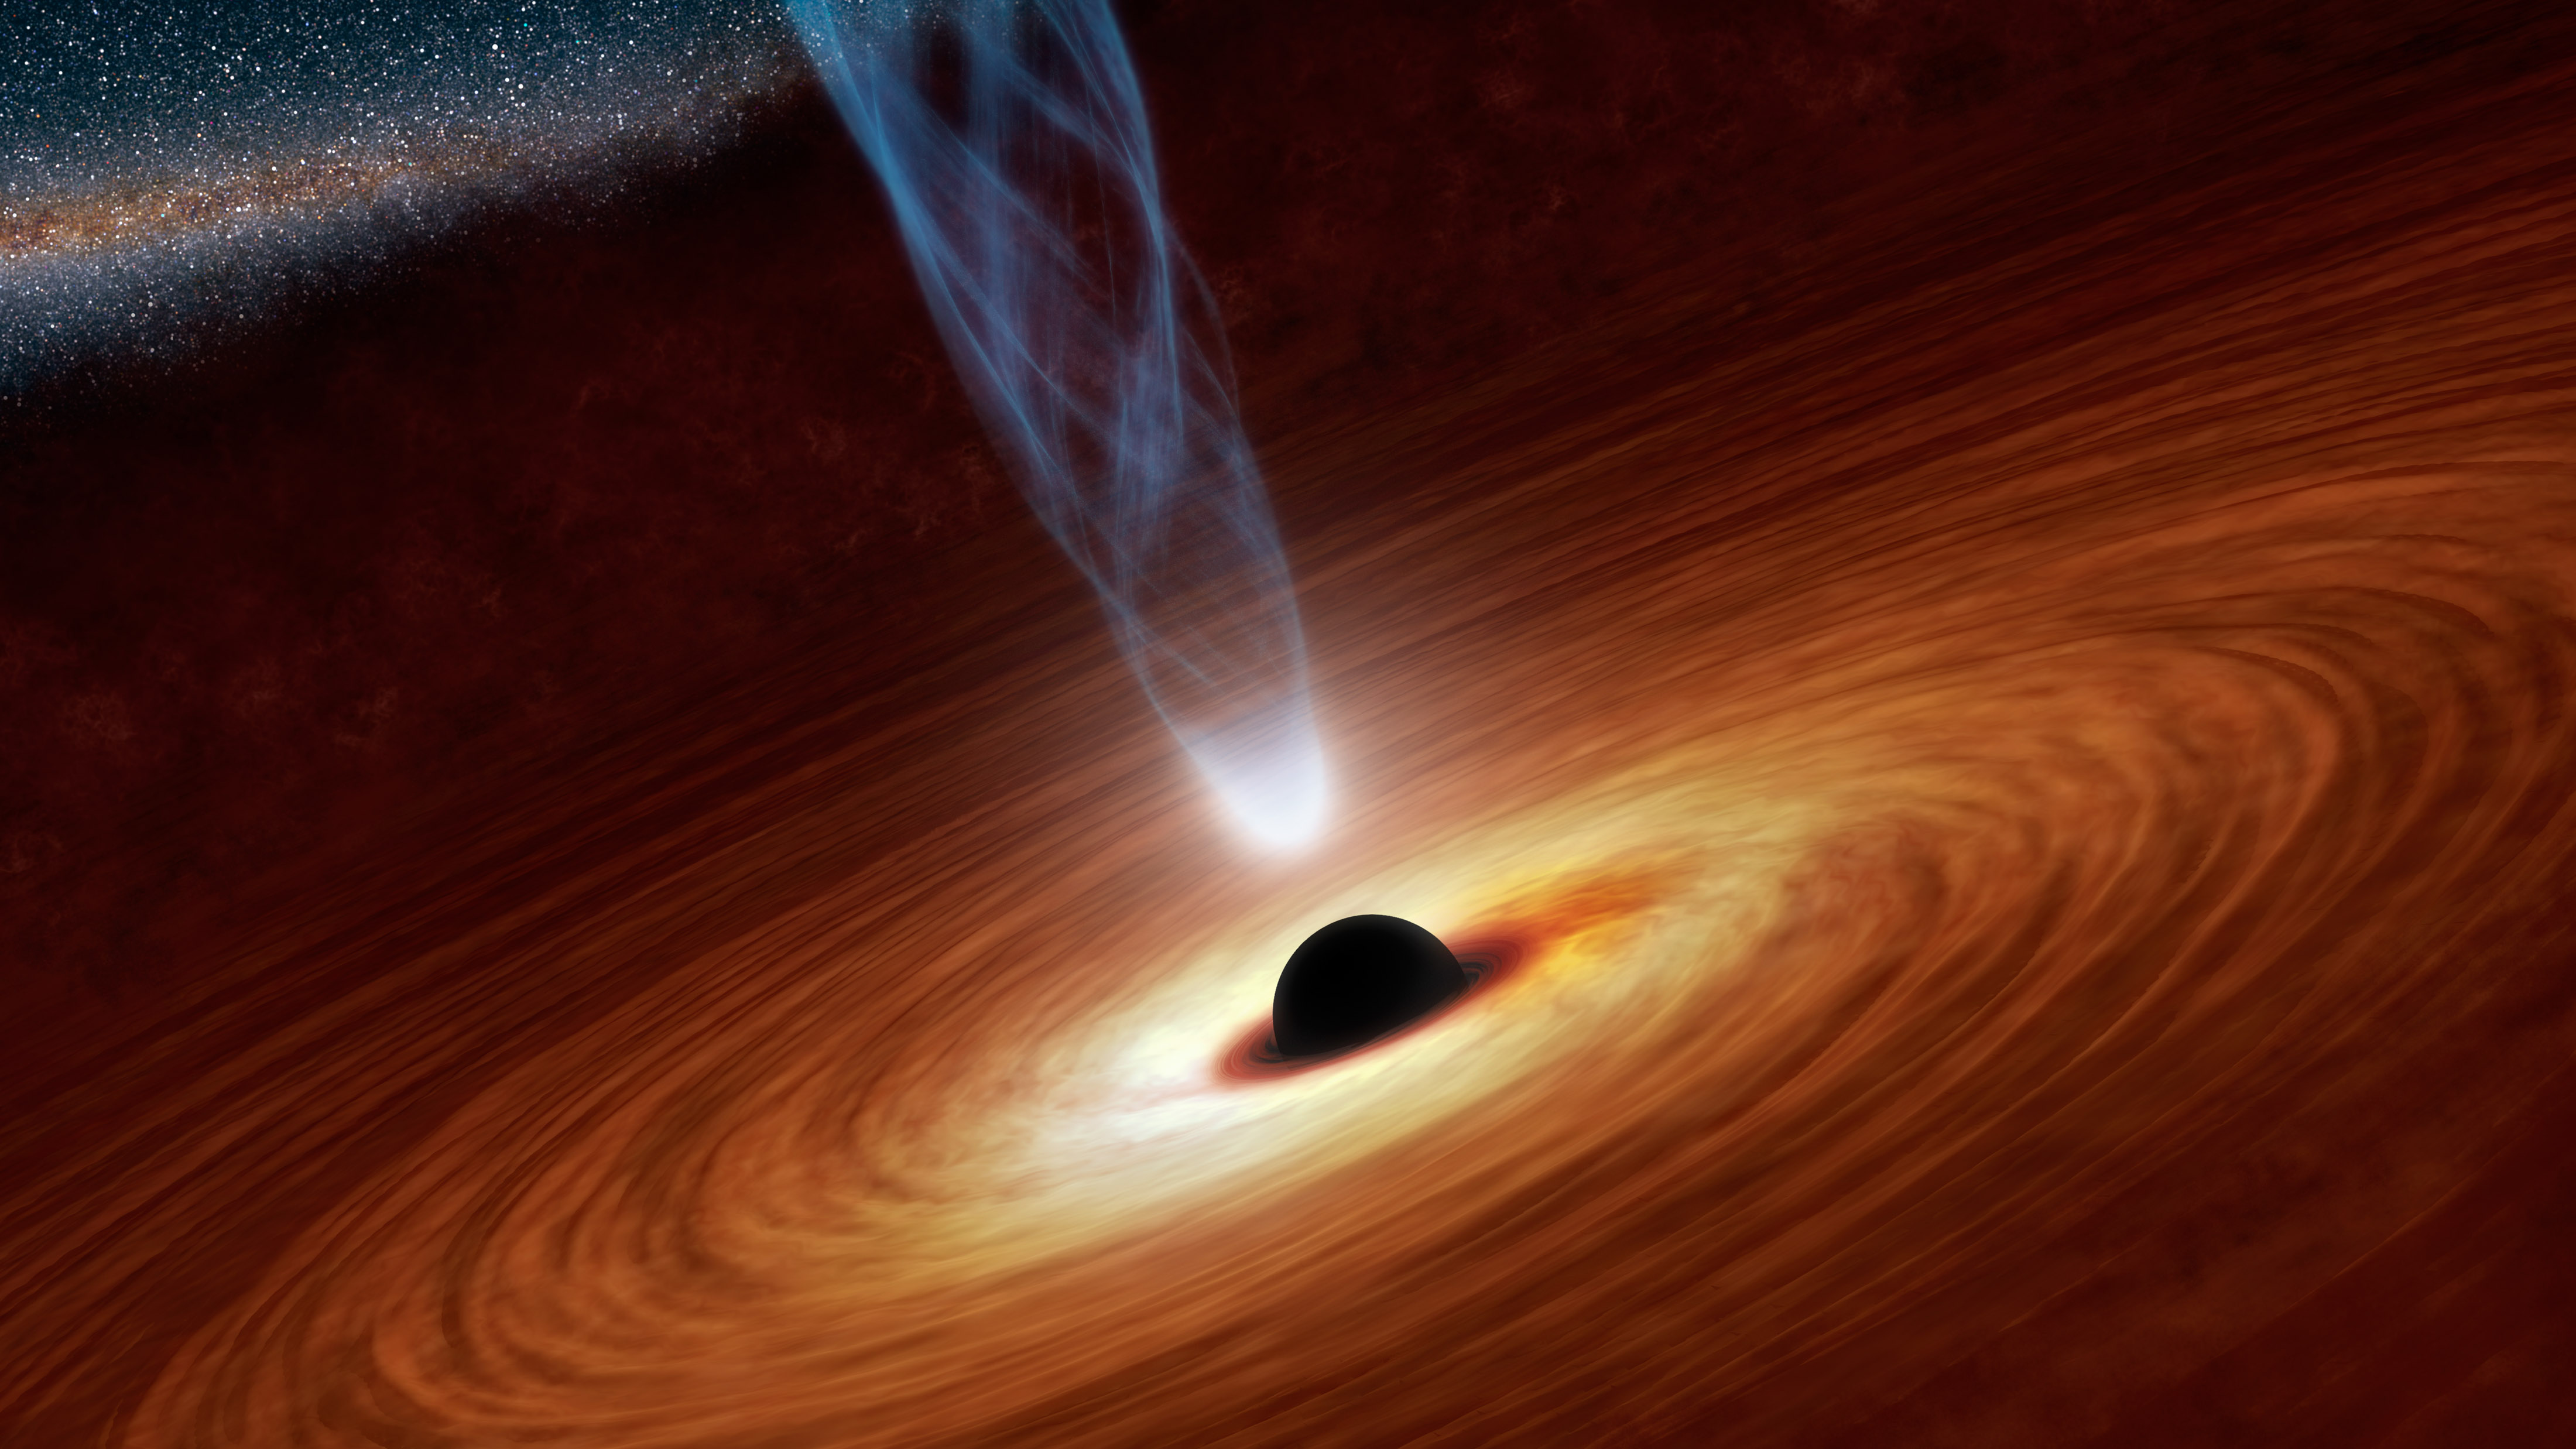 Scientists use computer simulations to understand the possibility of hyperspace travel via black holes